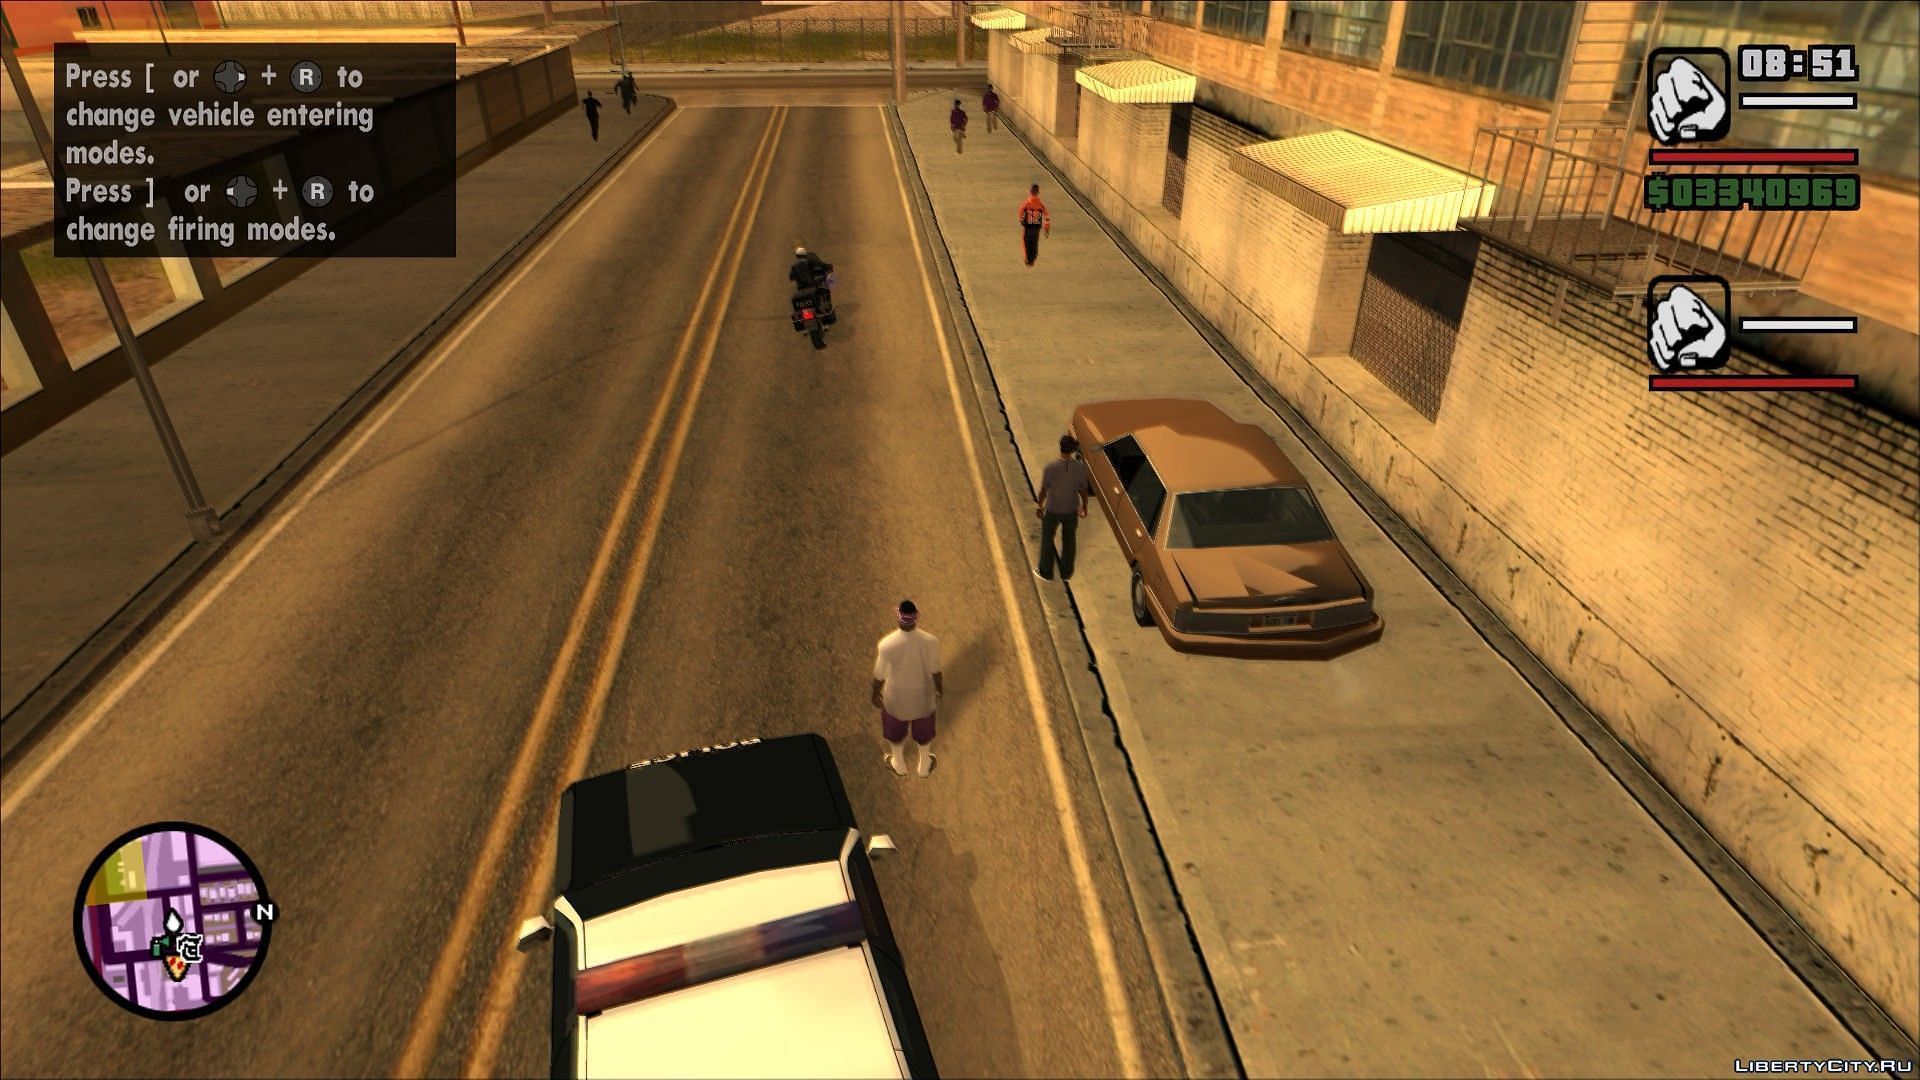 GTA San Andreas 2-player offline multiplayer: A hidden gem that Definitive  Edition players might not know about